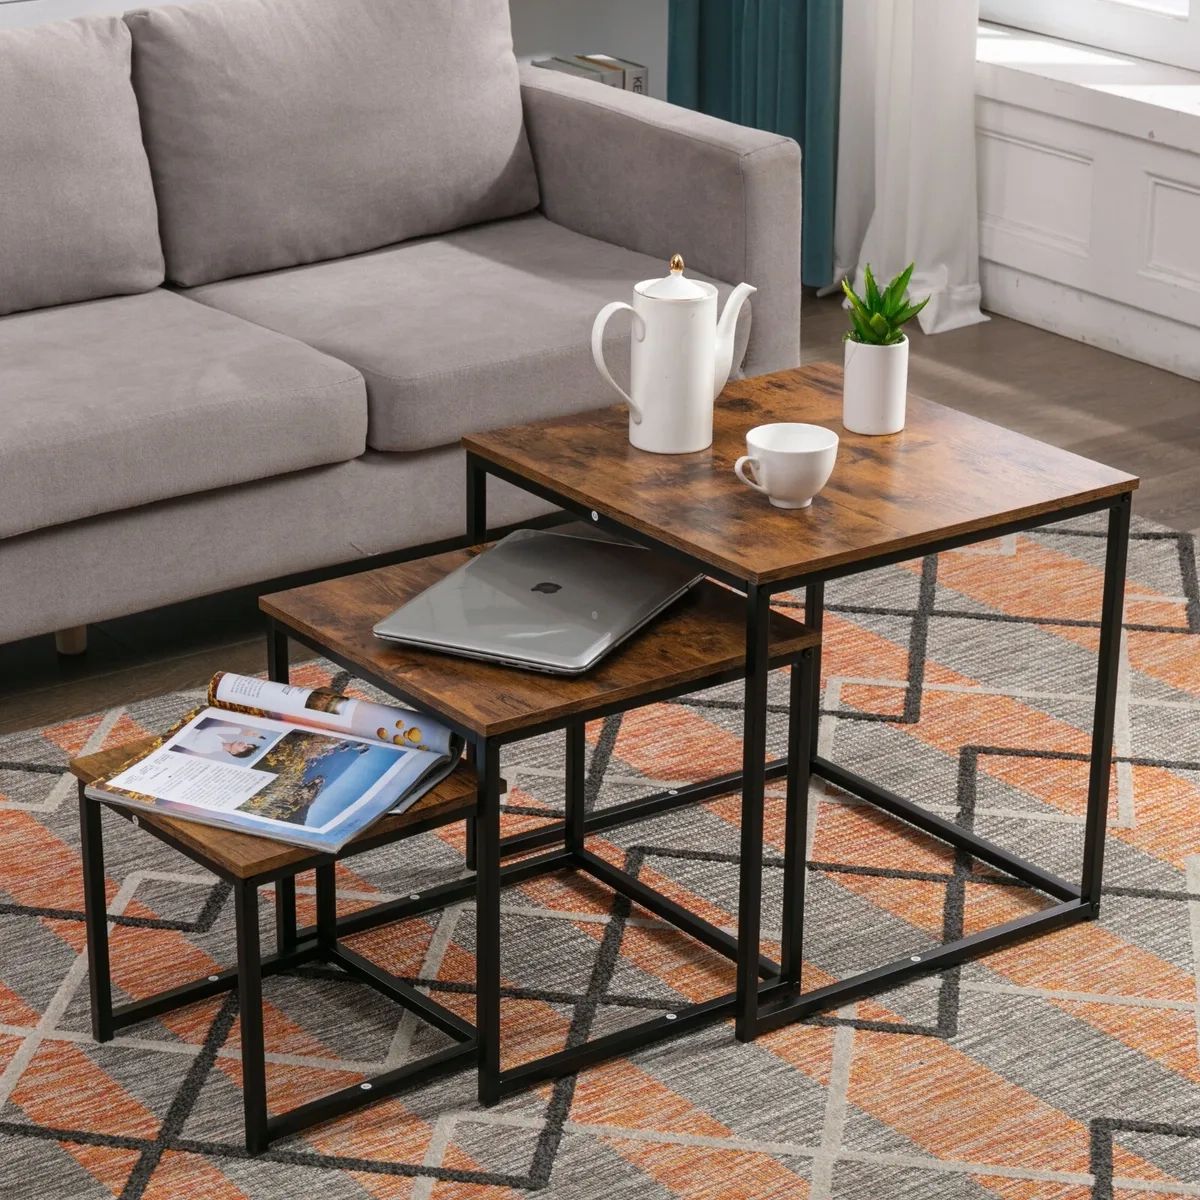 Nest Coffee Table 3 In 1 Set Compact Modern Design For Space Saving For Any  Room | Ebay With Regard To Coffee Tables Of 3 Nesting Tables (Photo 5 of 15)